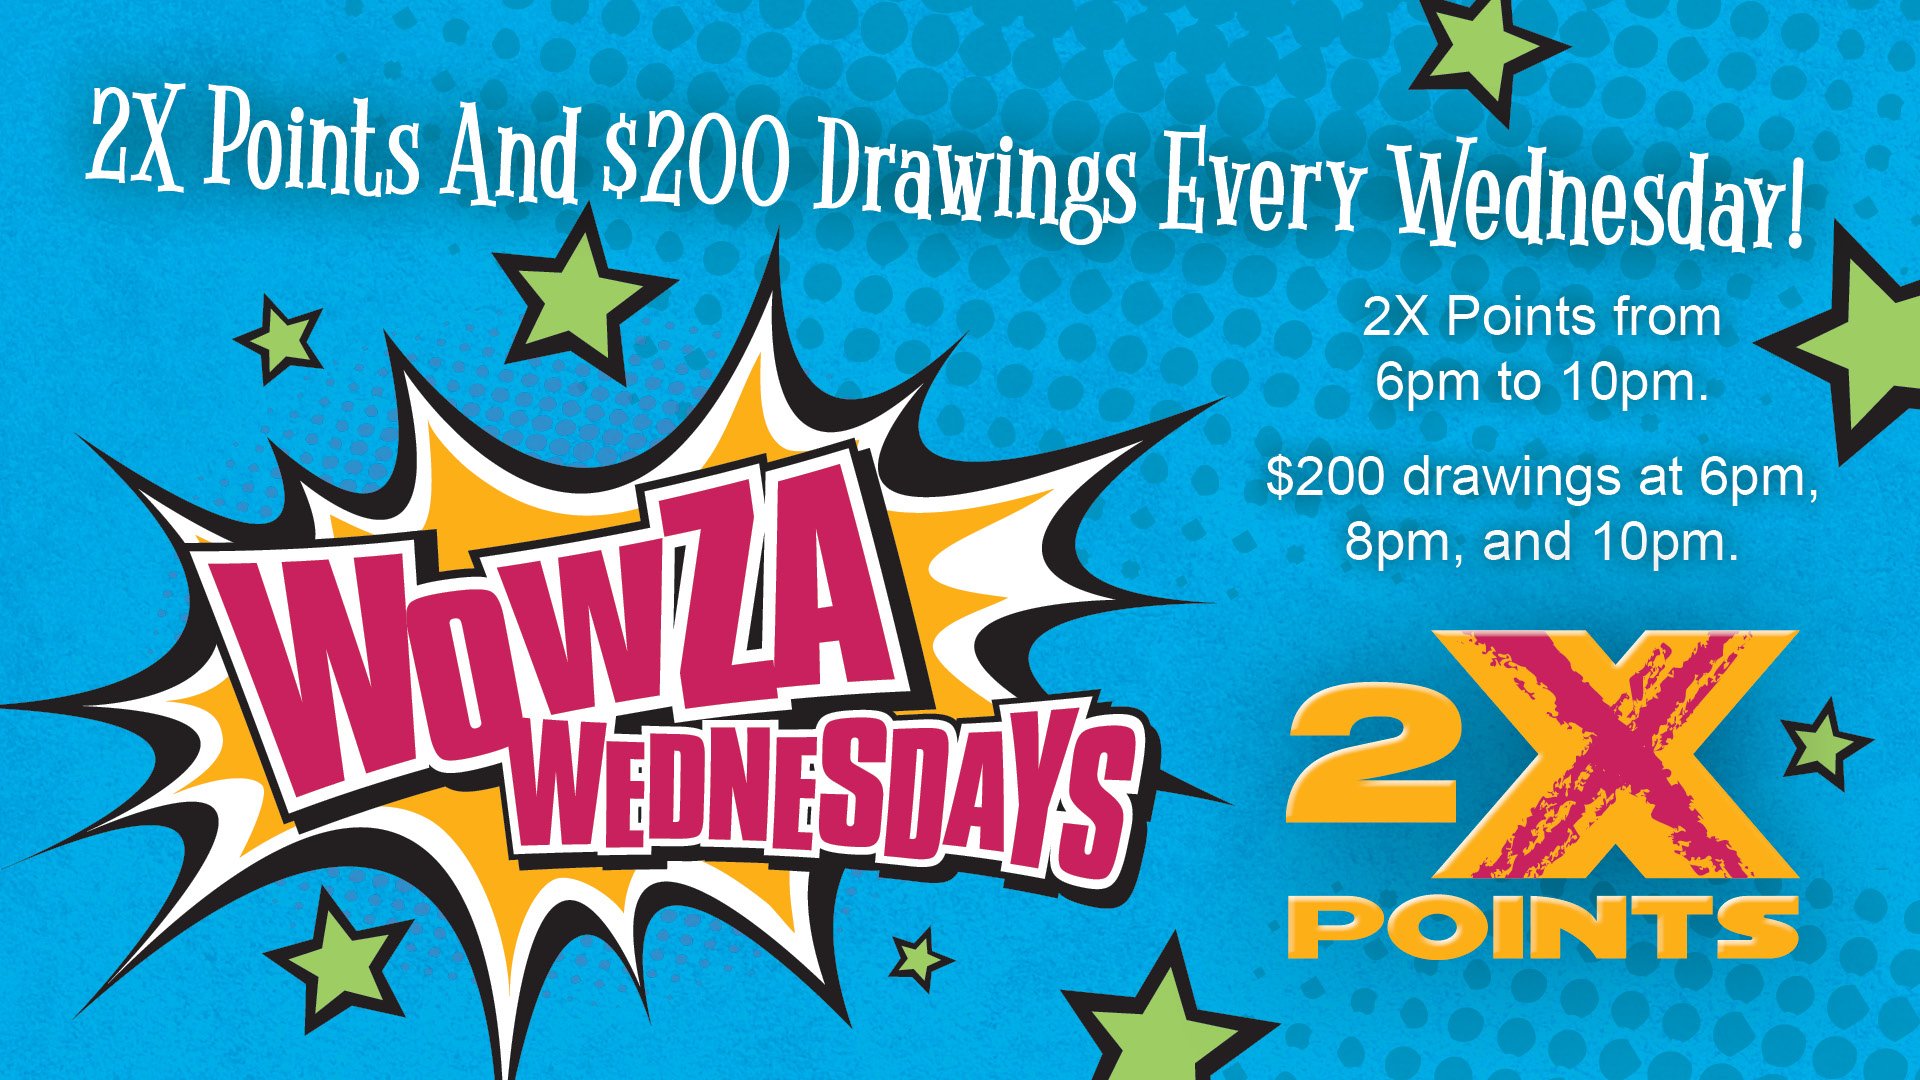 Wowza Wednesday drawings and 2X Points